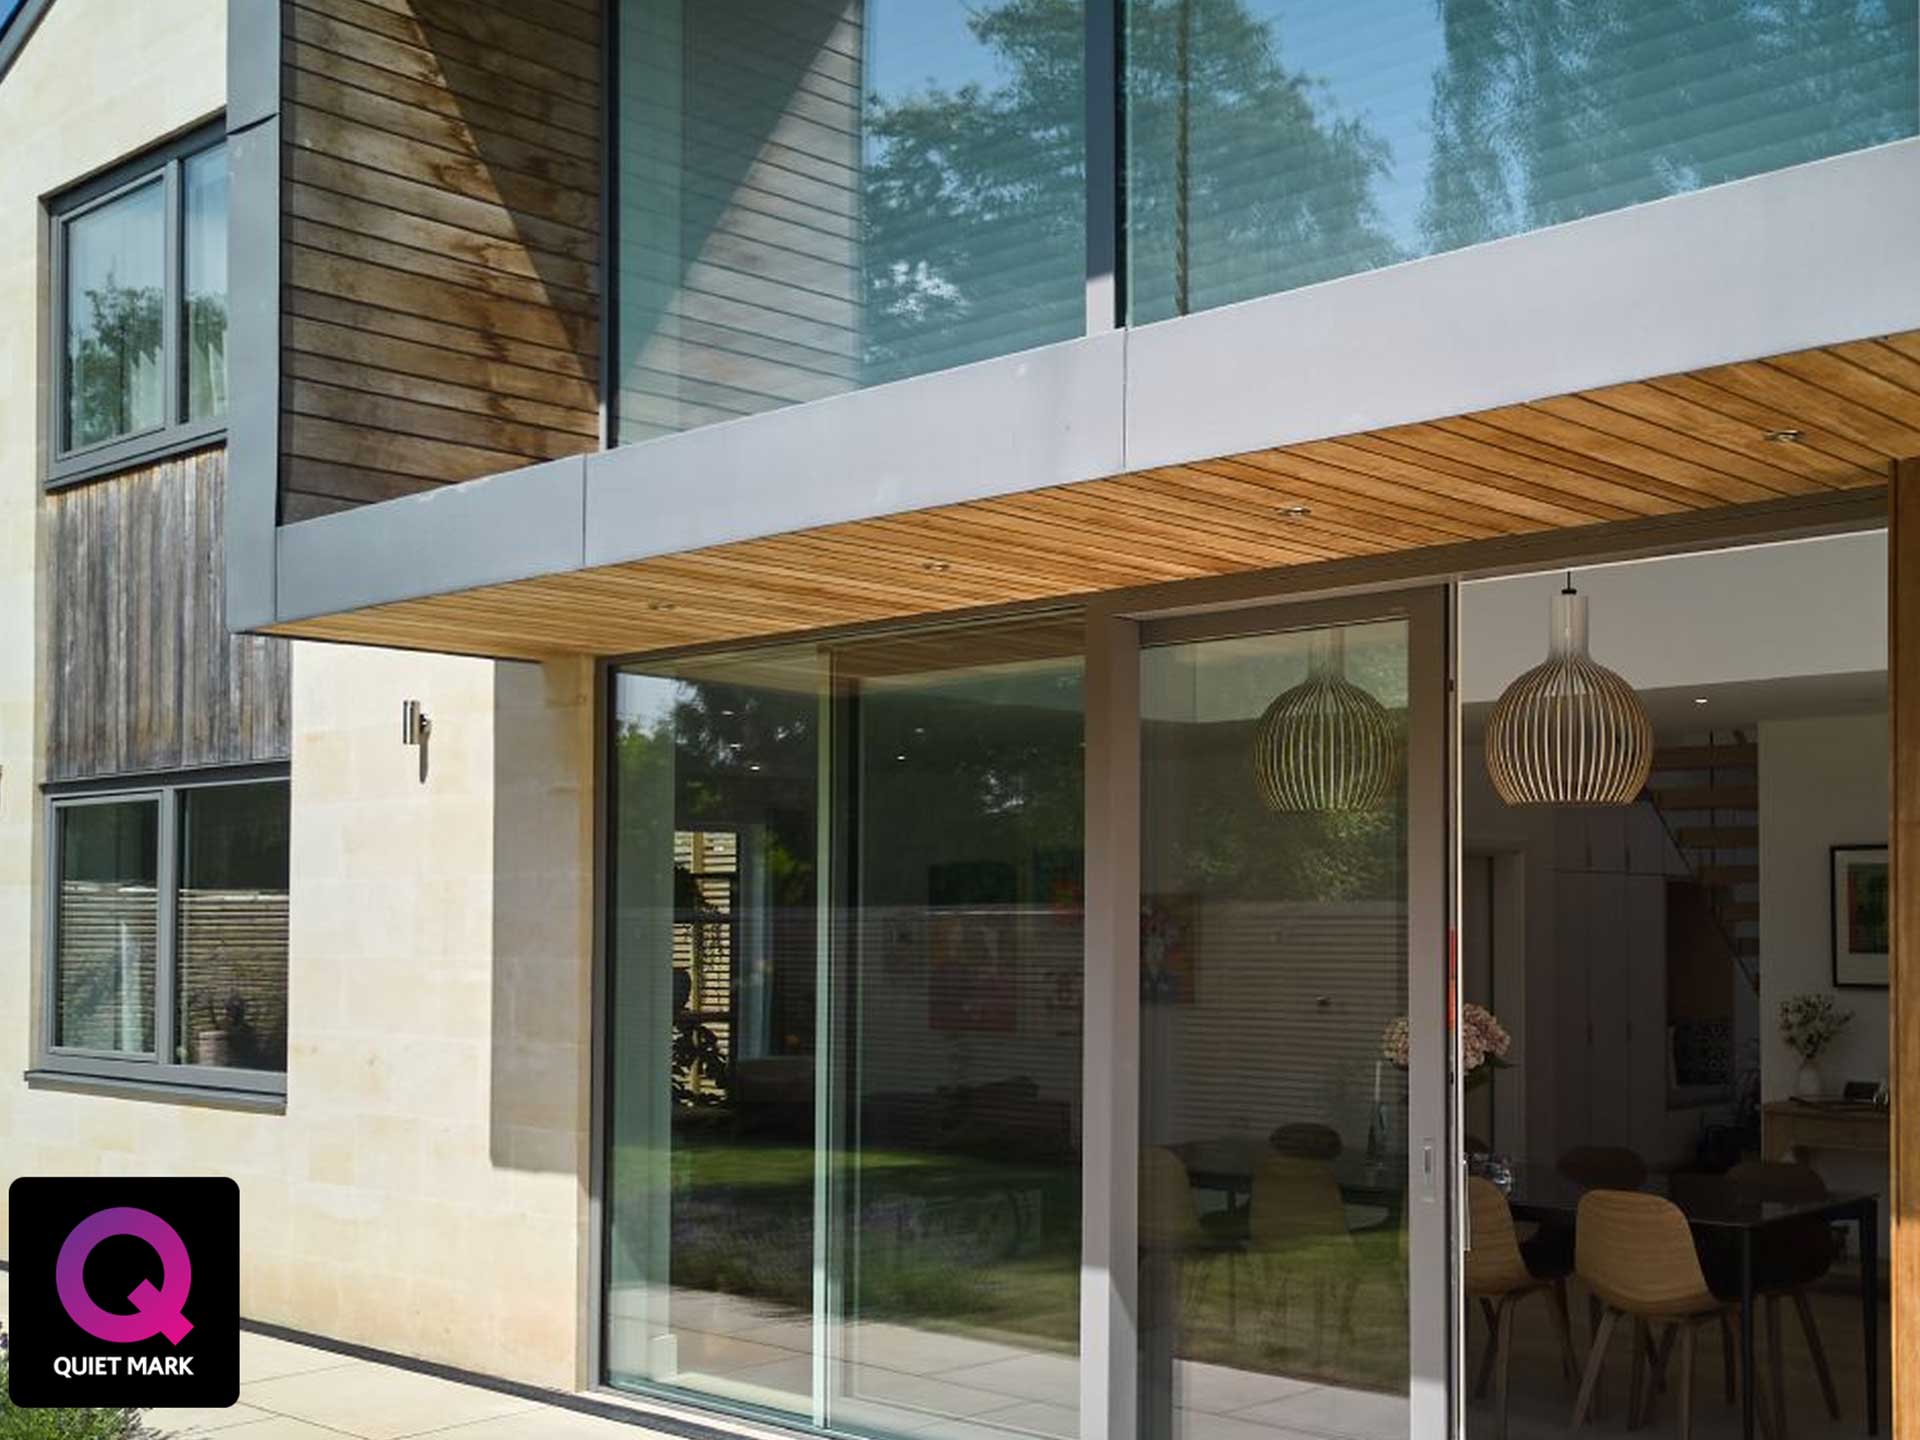 Triple-glazed glass can dramatically reduce the noise in your home